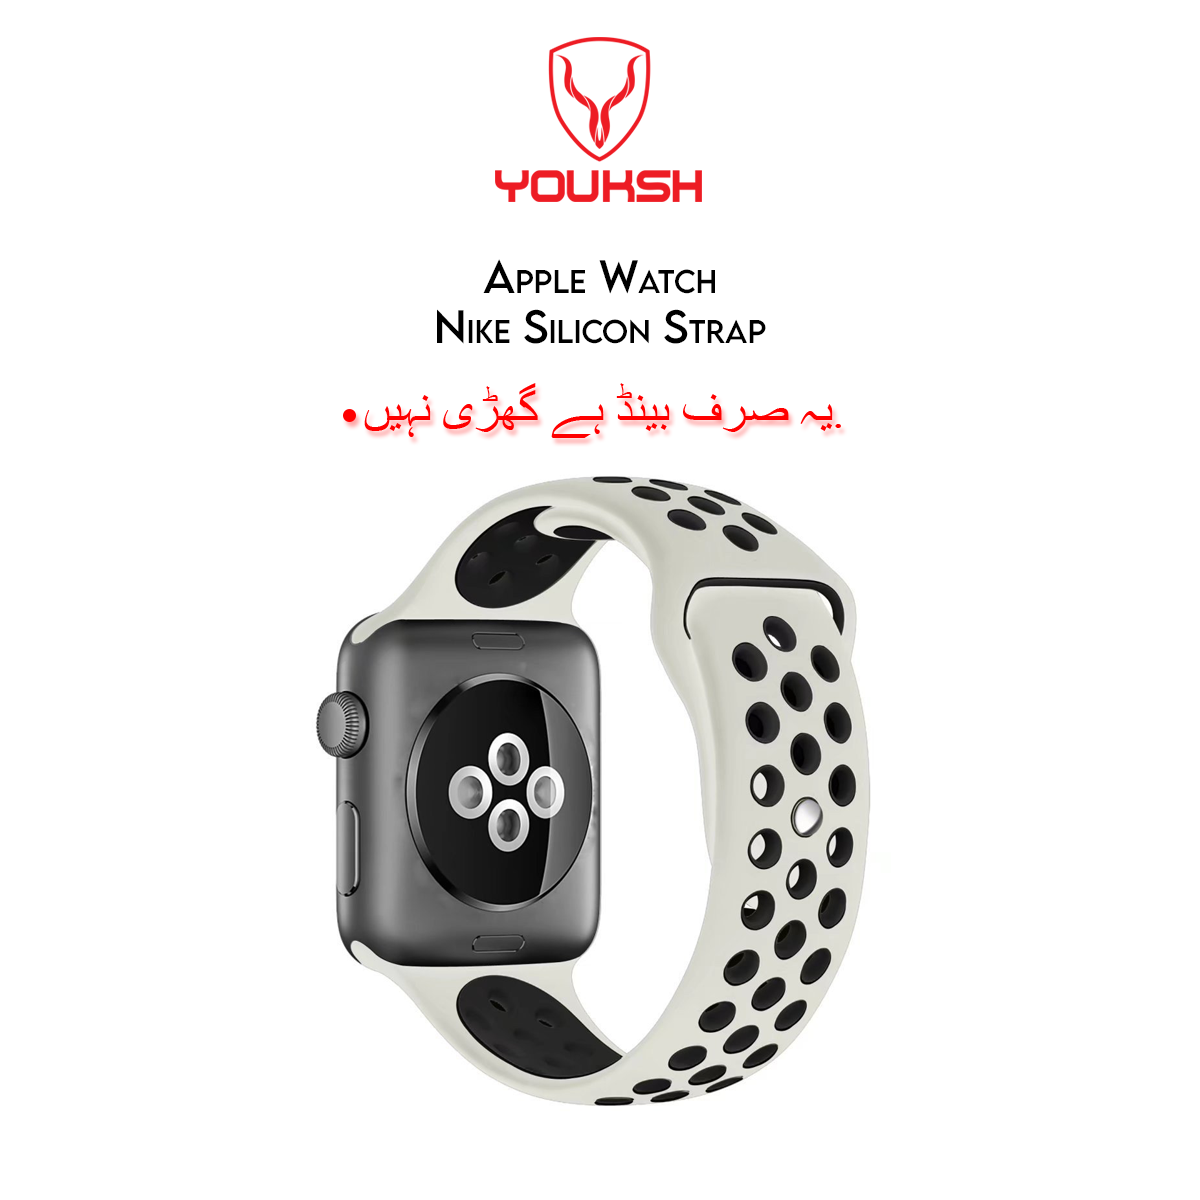 YOUKSH - Apple Watch 42mm/44mm Sports Silicone Strap - 42mm/44mm Sports Silicone Band Strap - For Apple Watch Series - 1/2/3/4/5/6.